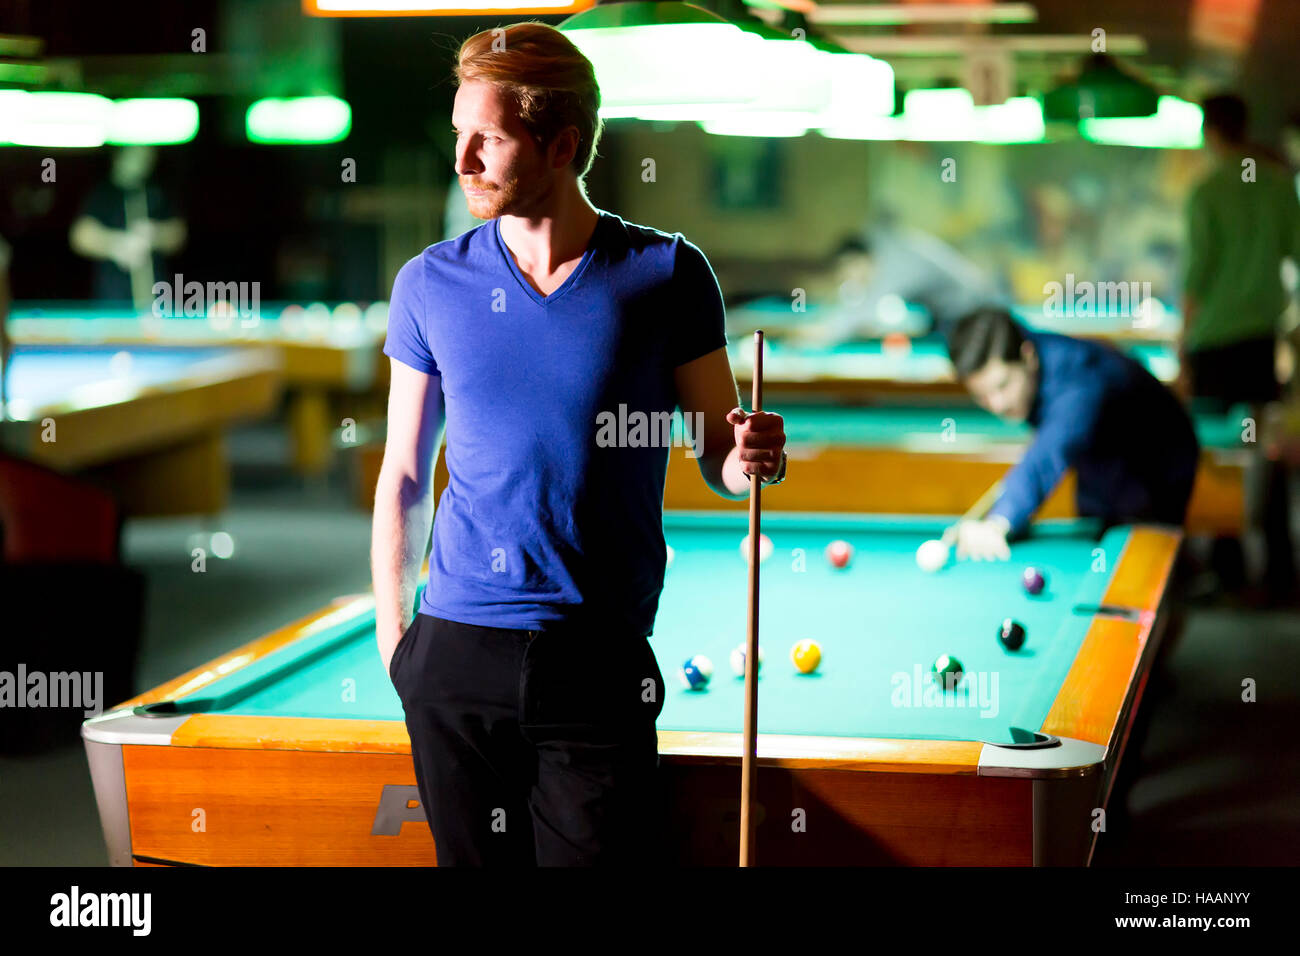 Portrait of a young man playing snooker Banque D'Images